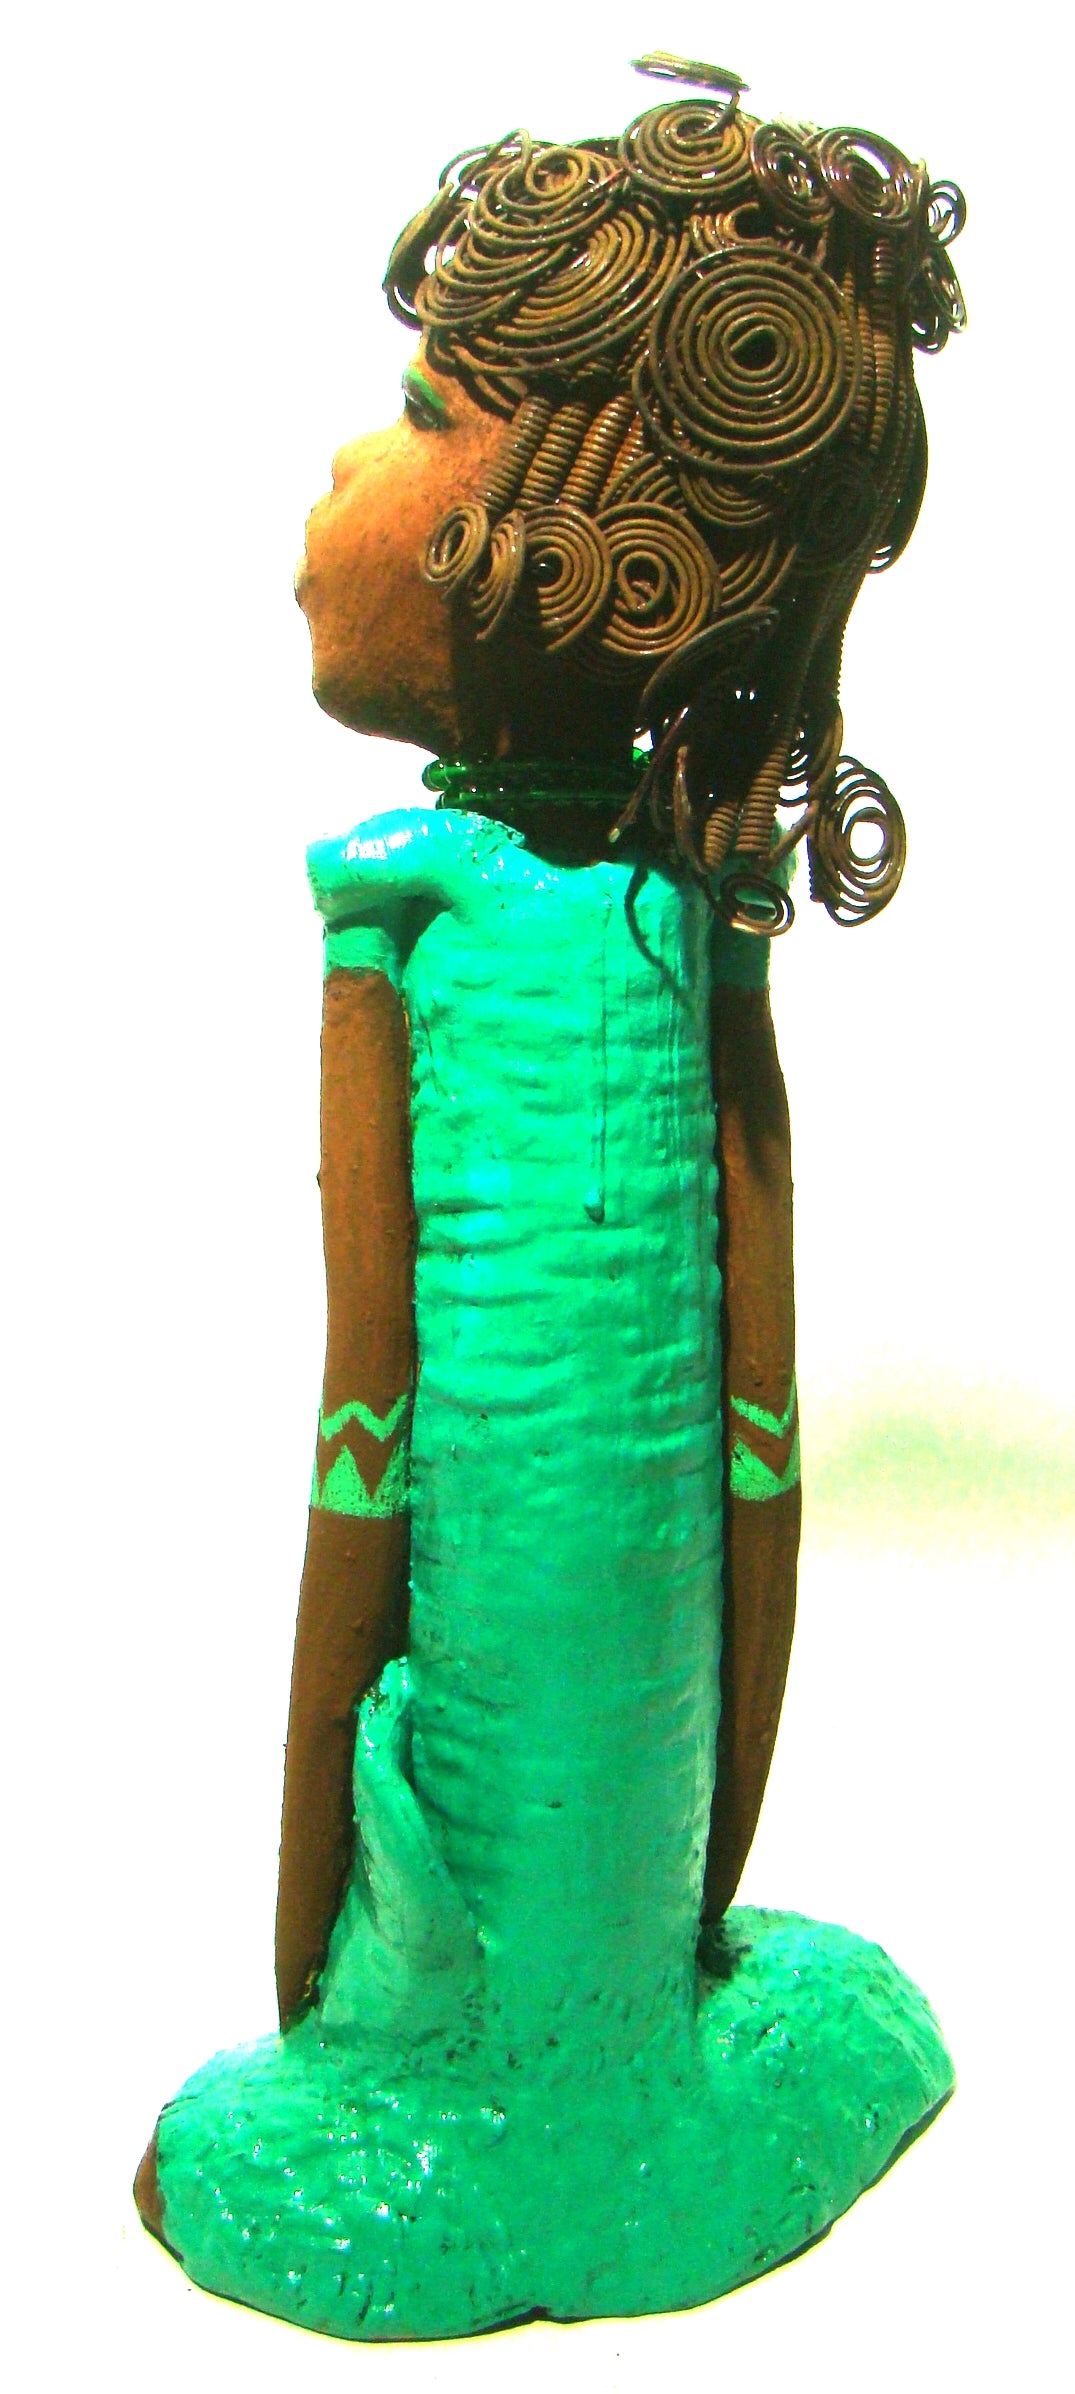      Melissa stands 18" x 9" x  5" and weighs 6.6 lbs.     She has over 30 feet of wire curls, twist, and coiled hair.     Melissa has a lovely honey brown complexion.     She has a aqua blue green dress with matching open purse.     Melissa is a tall statuesque goddess that awaits a new home.     Free Shipping!